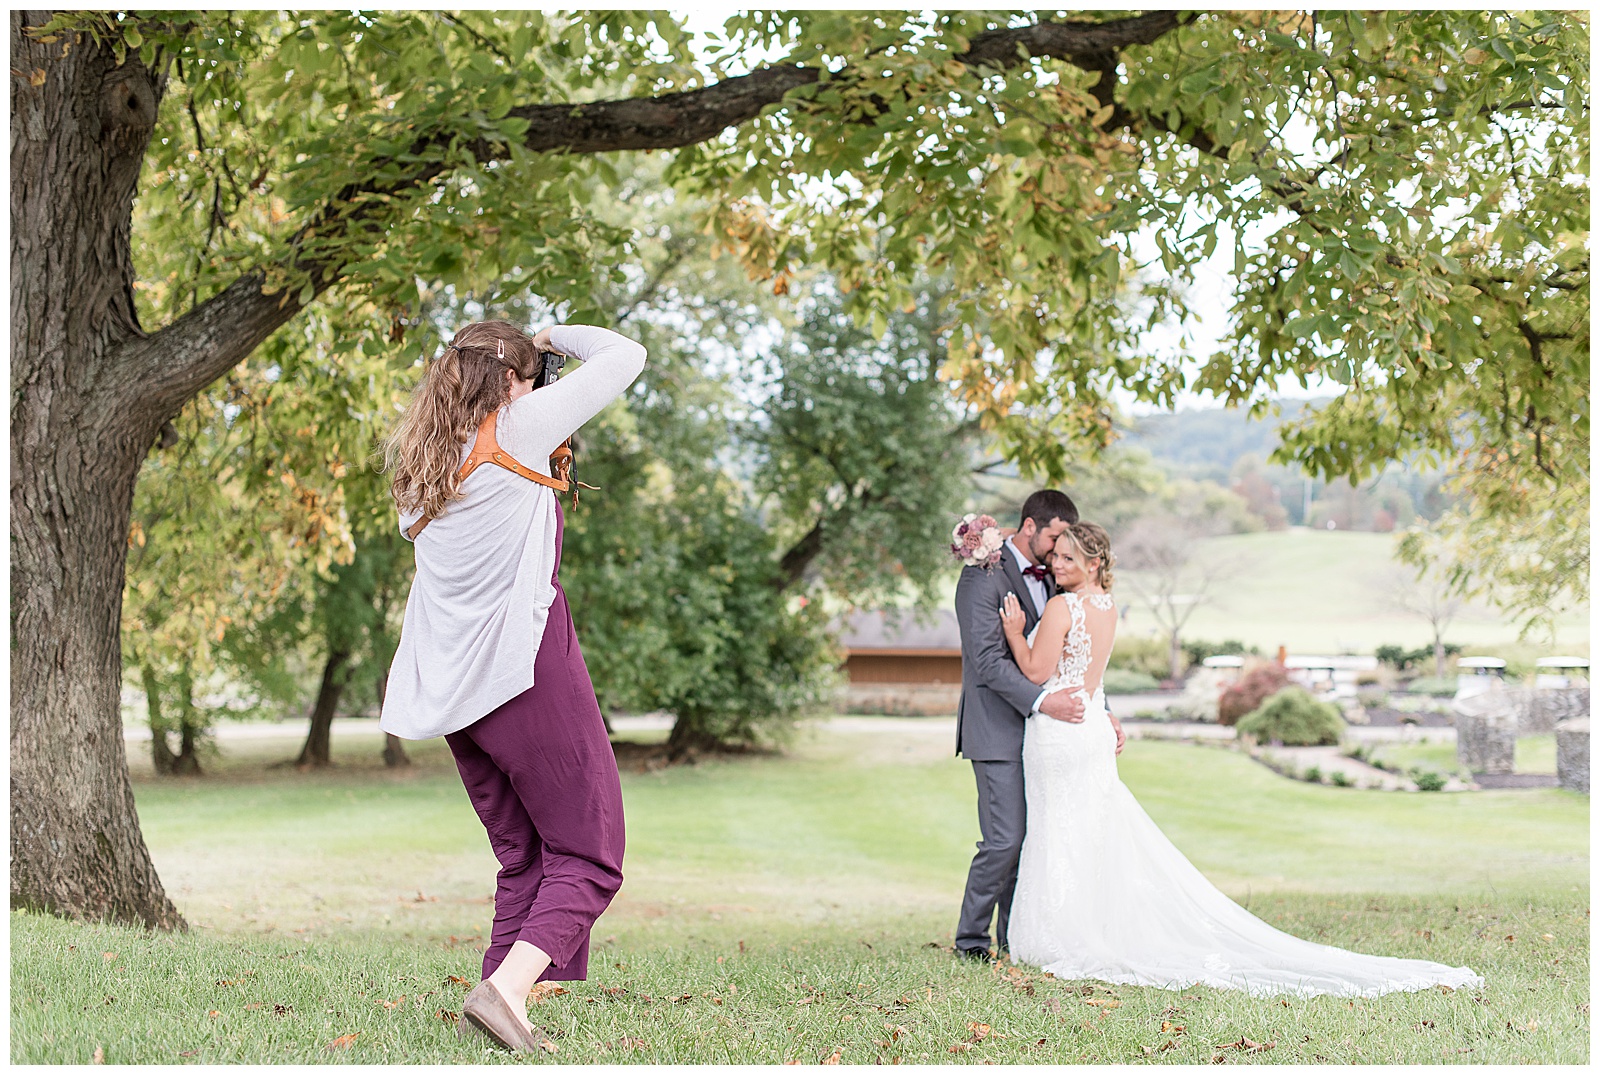 heather marie photography capturing a beautiful outdoor moment with bride and groom